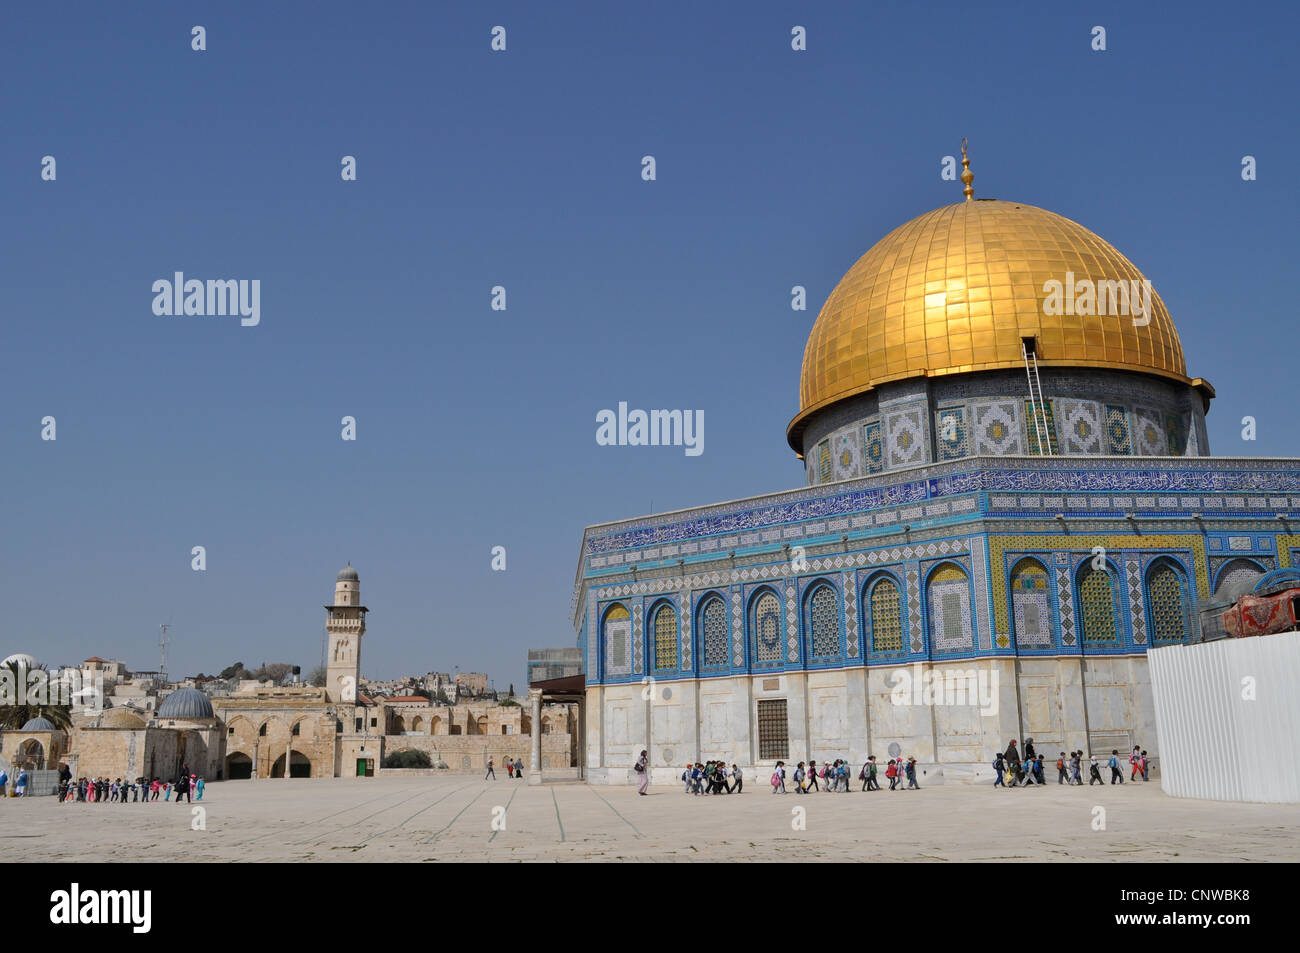 Temple Mount, Dome of the Rock, Al Aqsa Mosque site, East Jerusalem, Old City, disputed holy site f Muslims, Christians and Jews Stock Photo